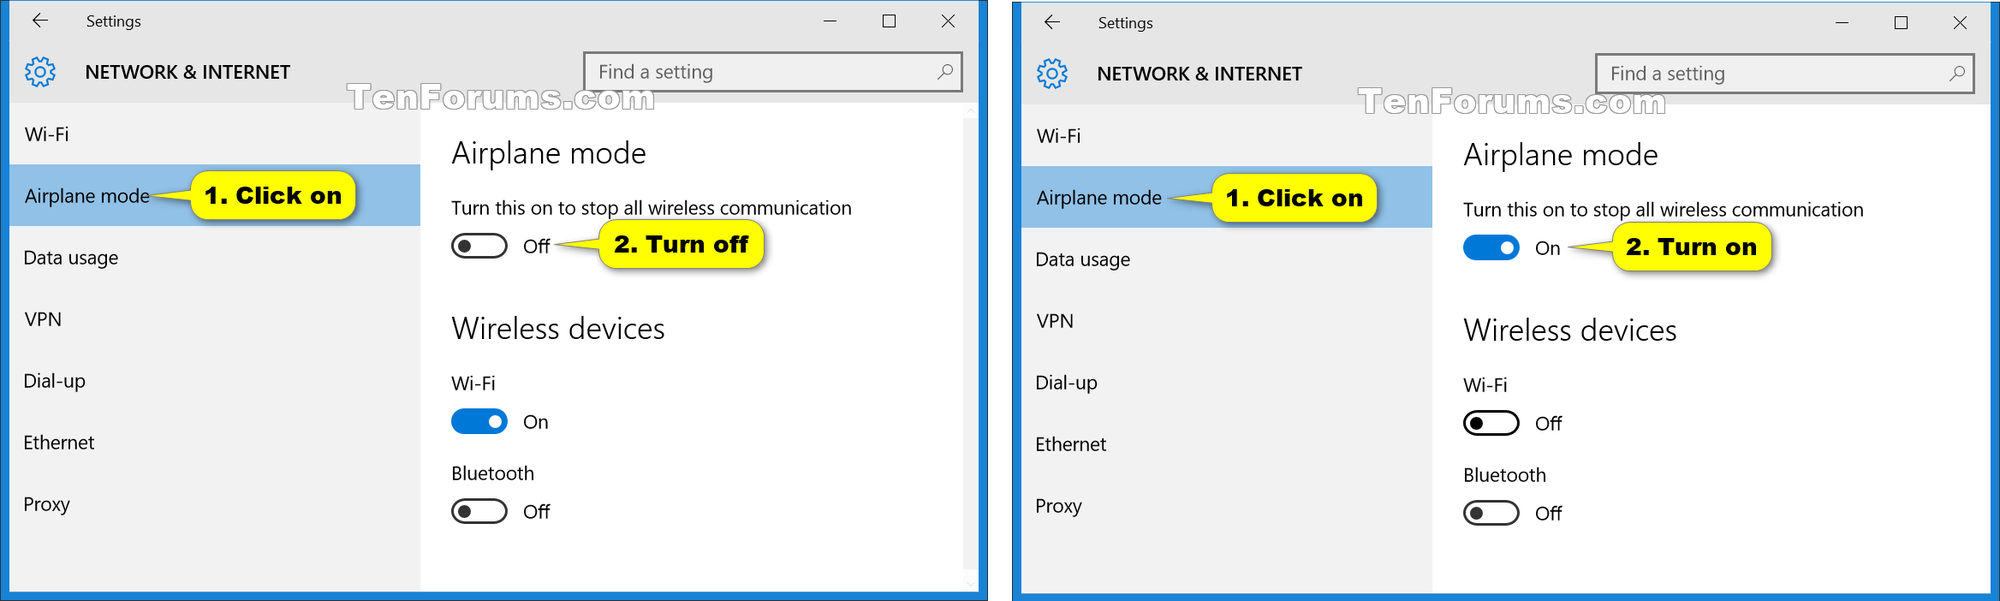 Windows 10 Airplane mode automatically switching on and off by itself? 7zY1c.png